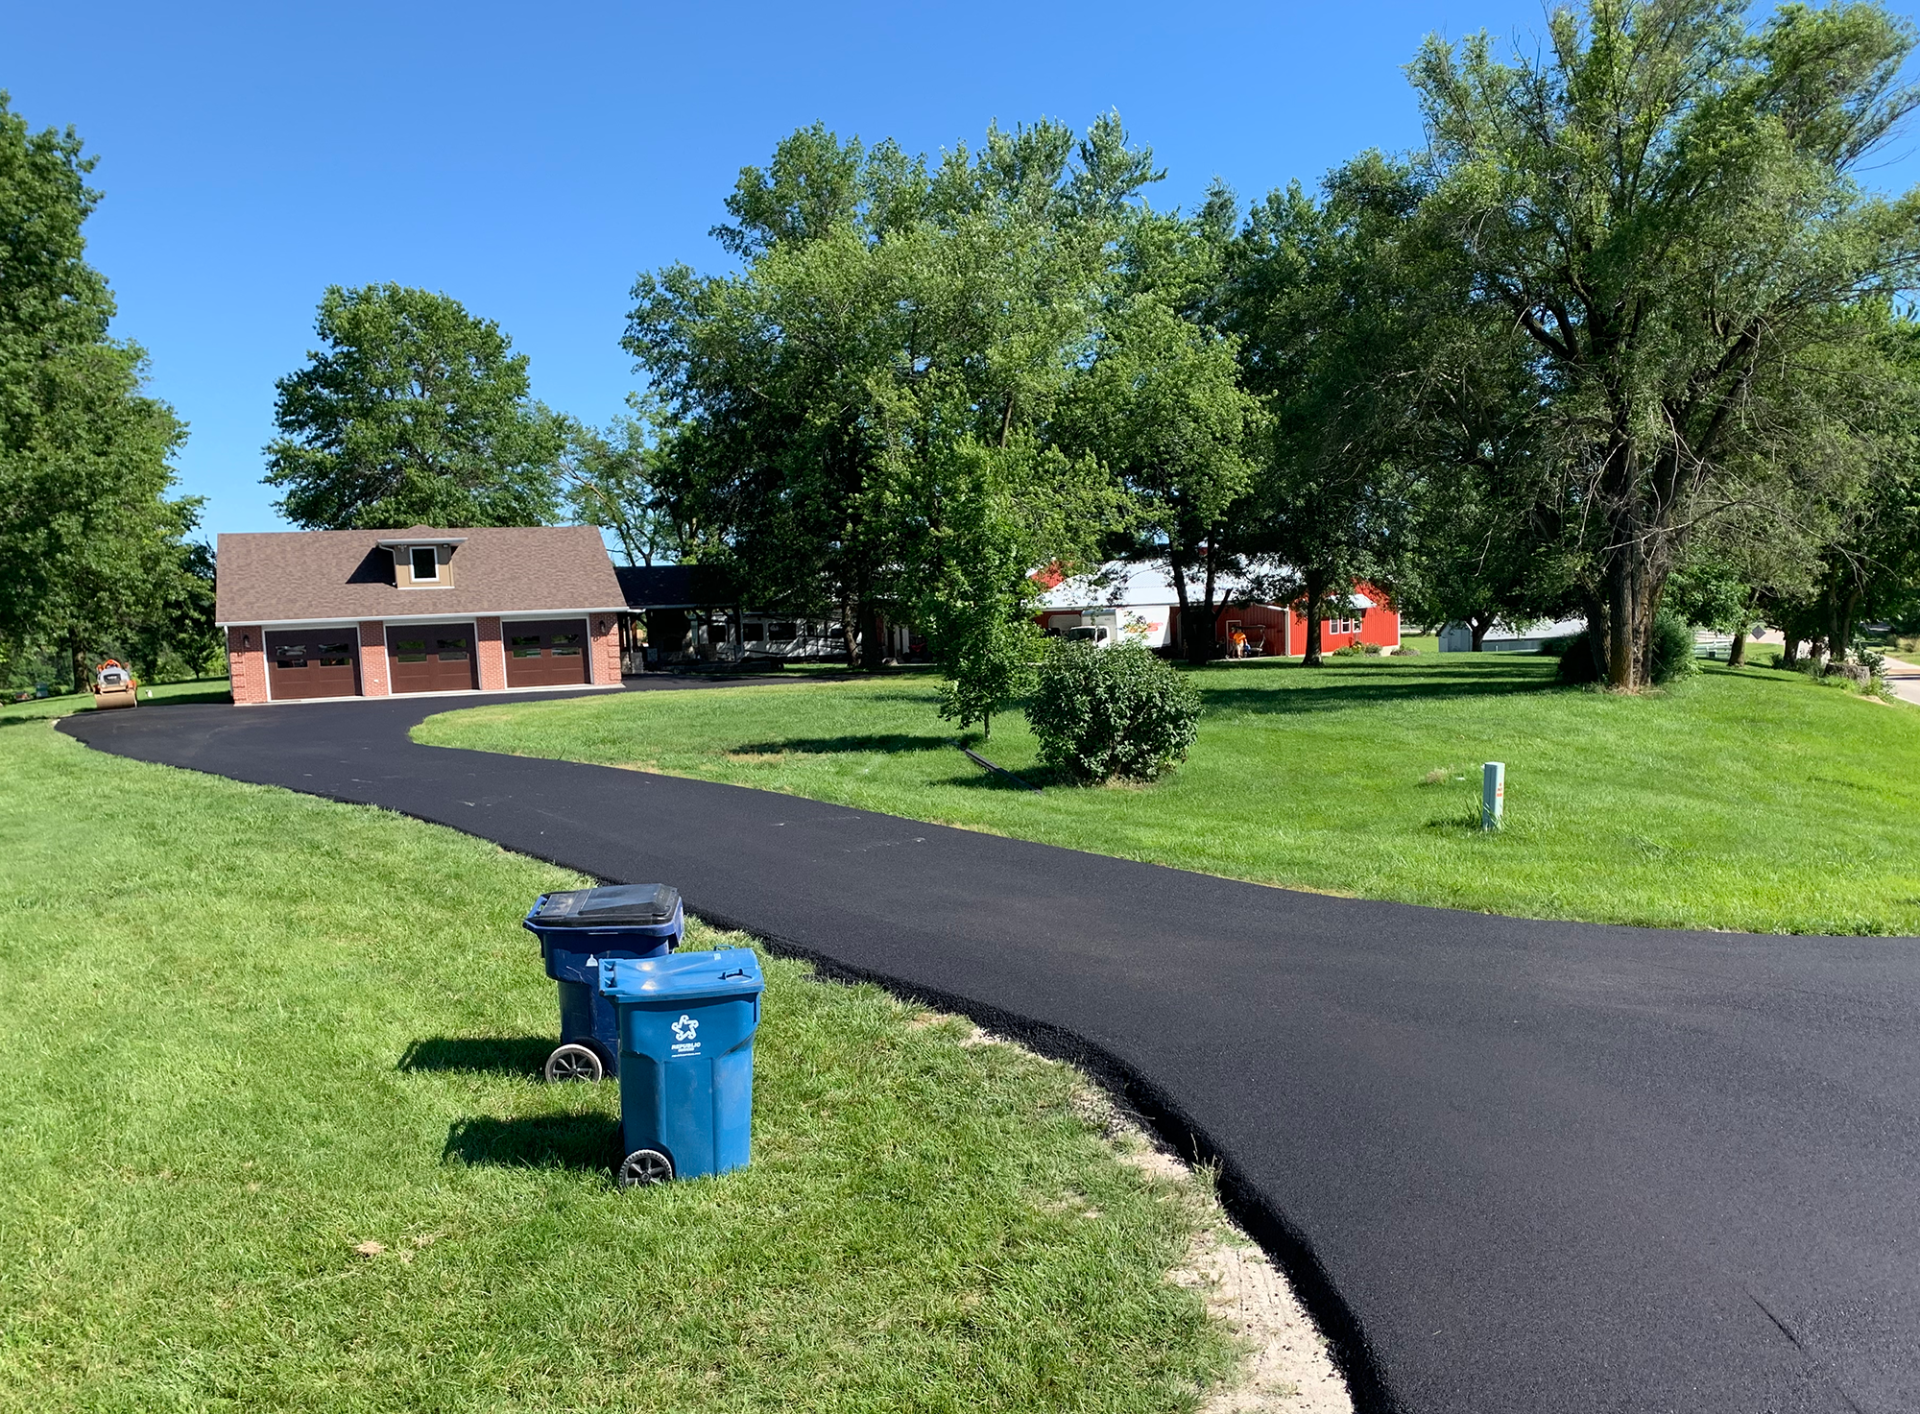 Get the Top-Notch Residential Asphalt Service You Deserve From MoSEAL in Columbia, MO.